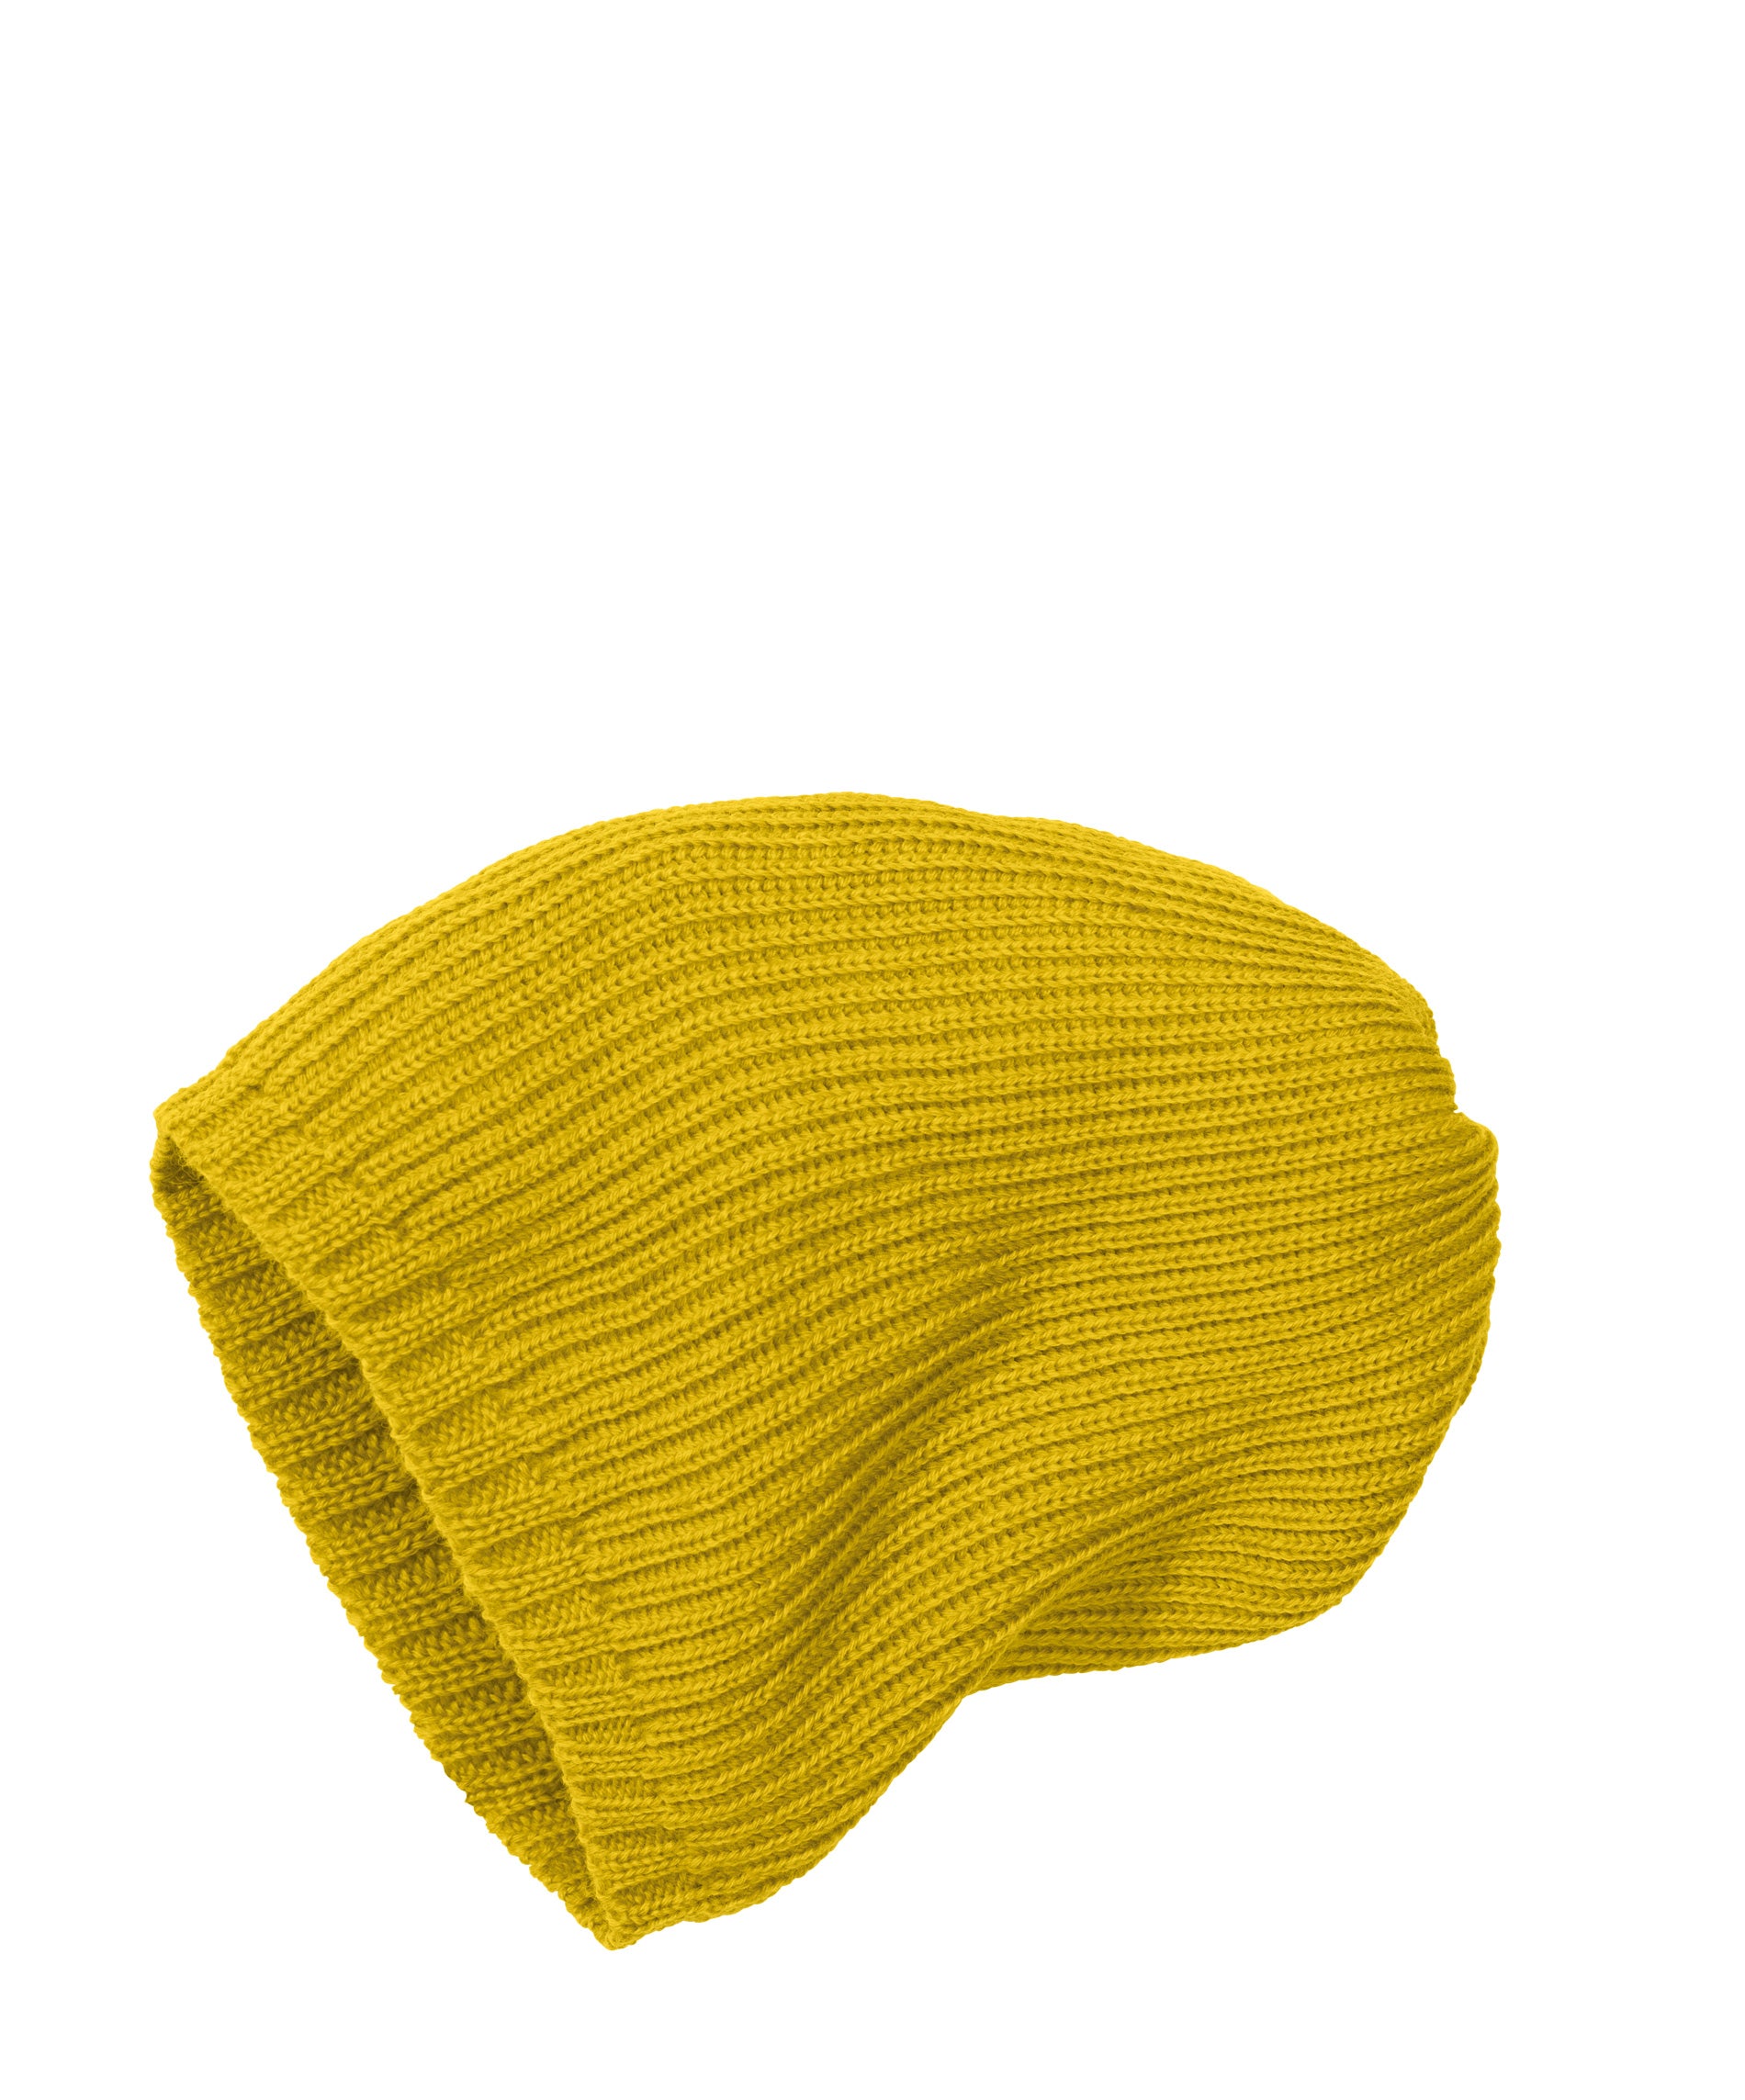 Disana Knitted Wool Hat Curry - Muts Gebreide Wol Curry Geel